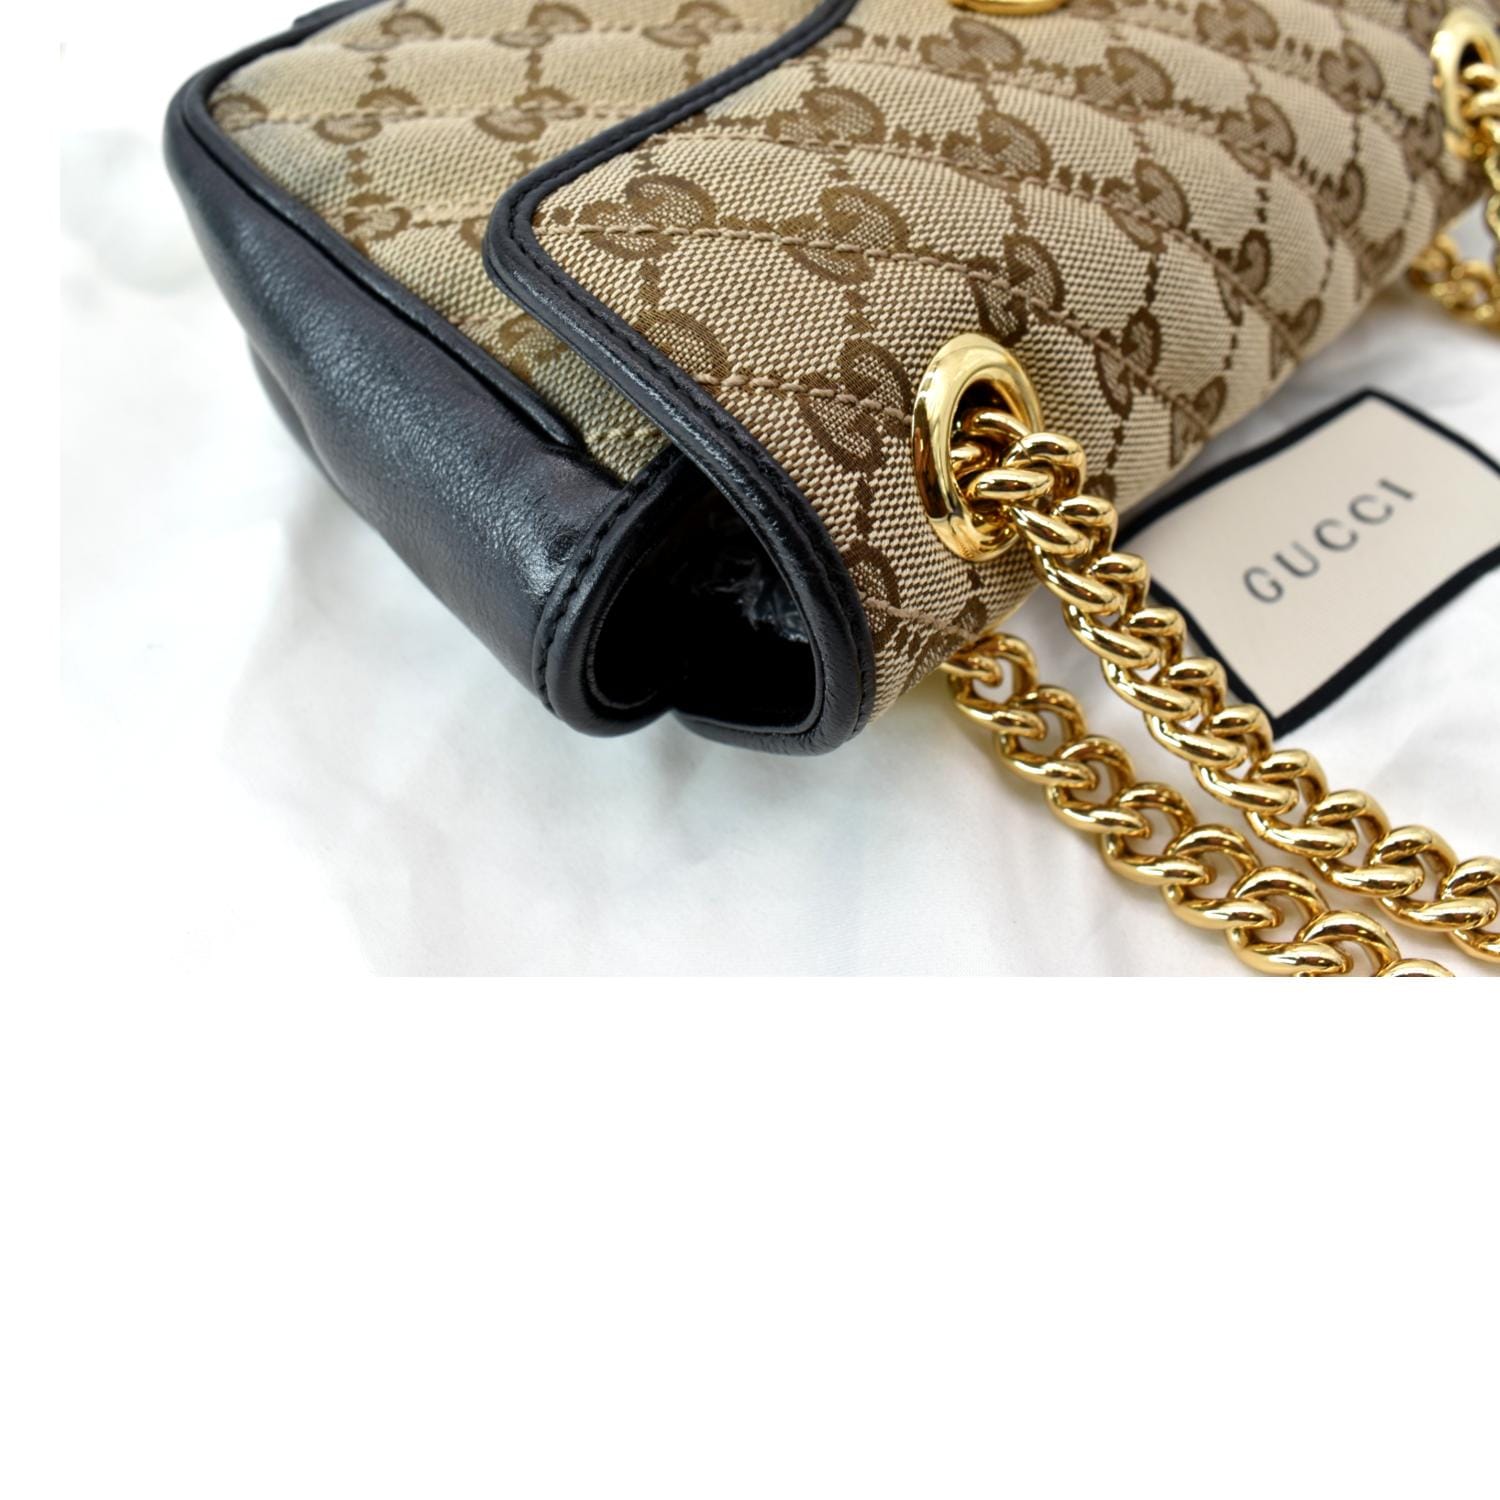 GUCCI MARMONT QUILTED GG CANVAS BLACK LEATHER